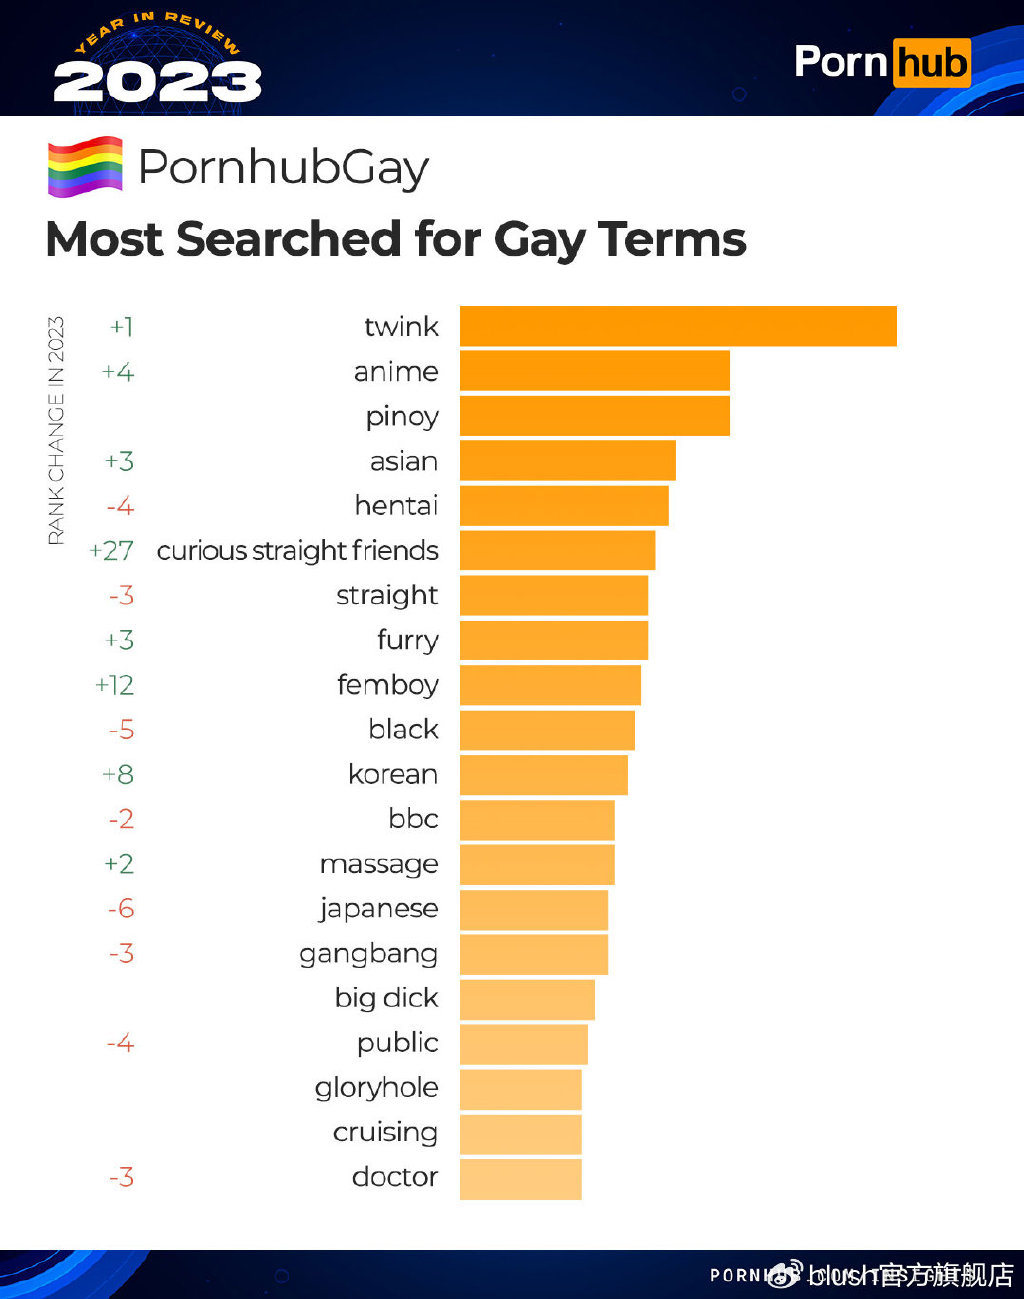 pornhub-insights-2023-year-in-review-gay-most-searched-for-terms.jpg